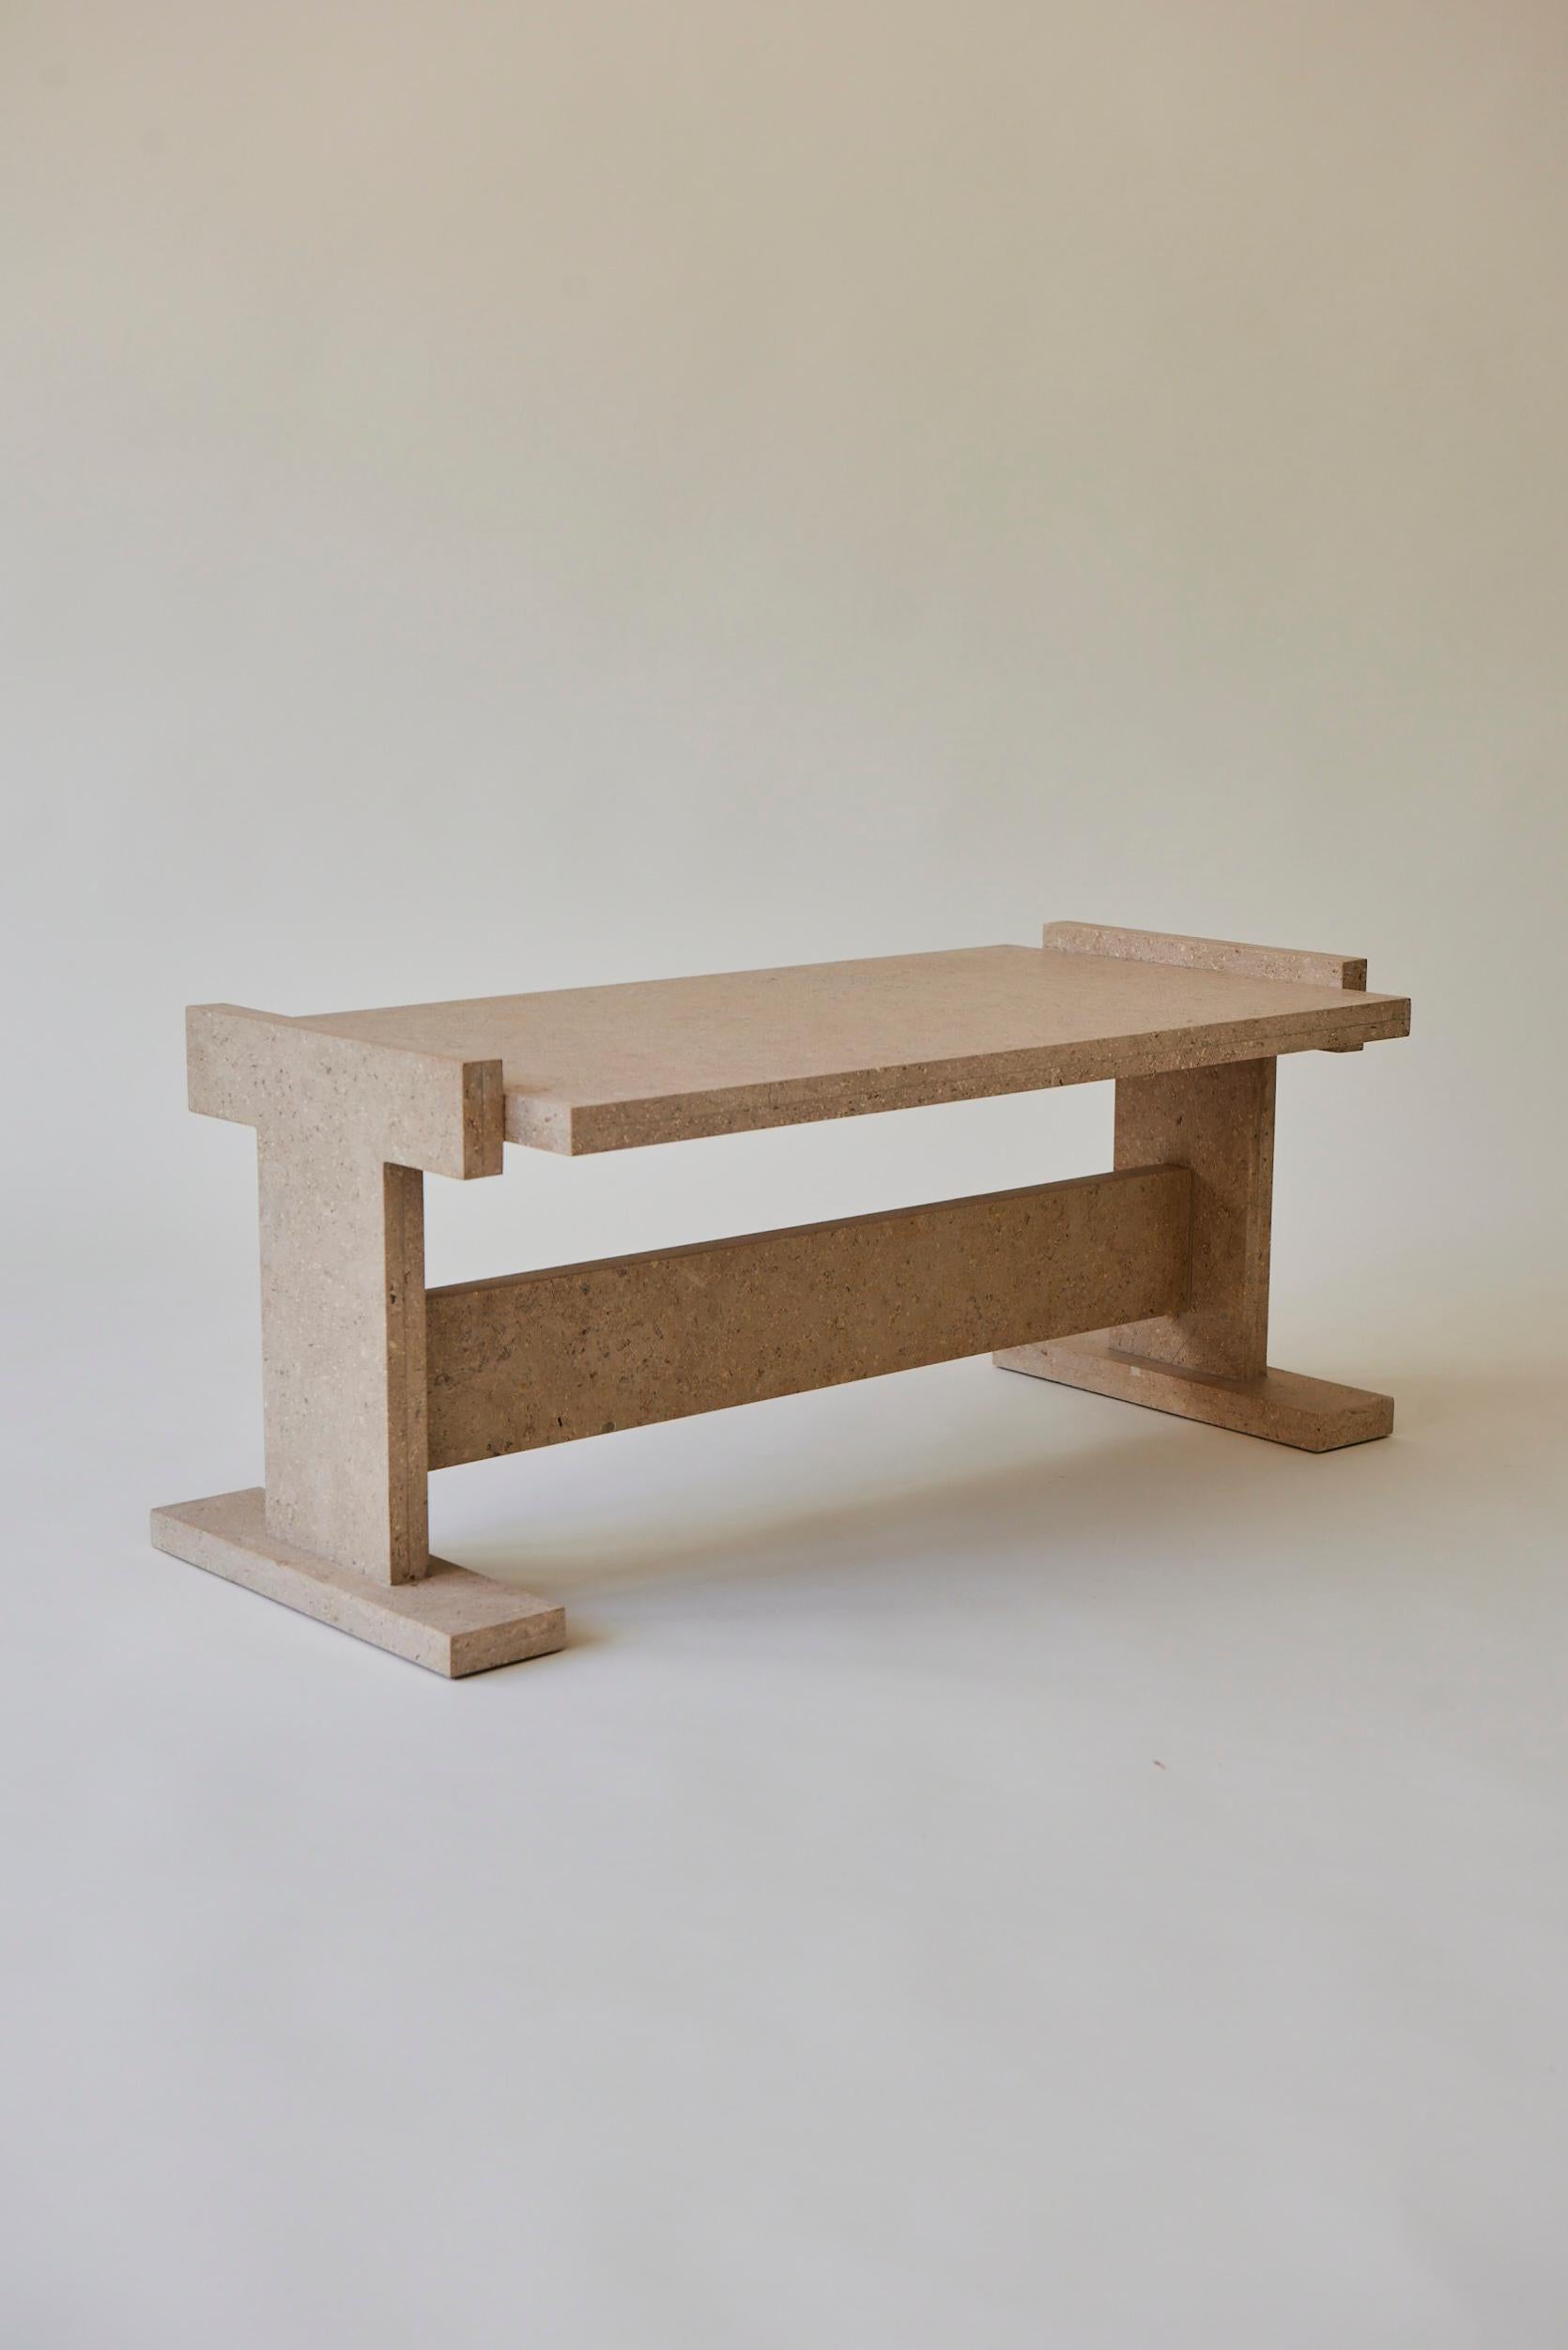 Limestone Neave Coffee Table by Nish Studio
Dimensions: W 41.8 x D87.4 x H 34.6 cm.
Materials: Limestone

N I S H is a Cape Town based Fashion and Furniture design studio. N I S H creates contemporary, elegant and progressive designs that salute the